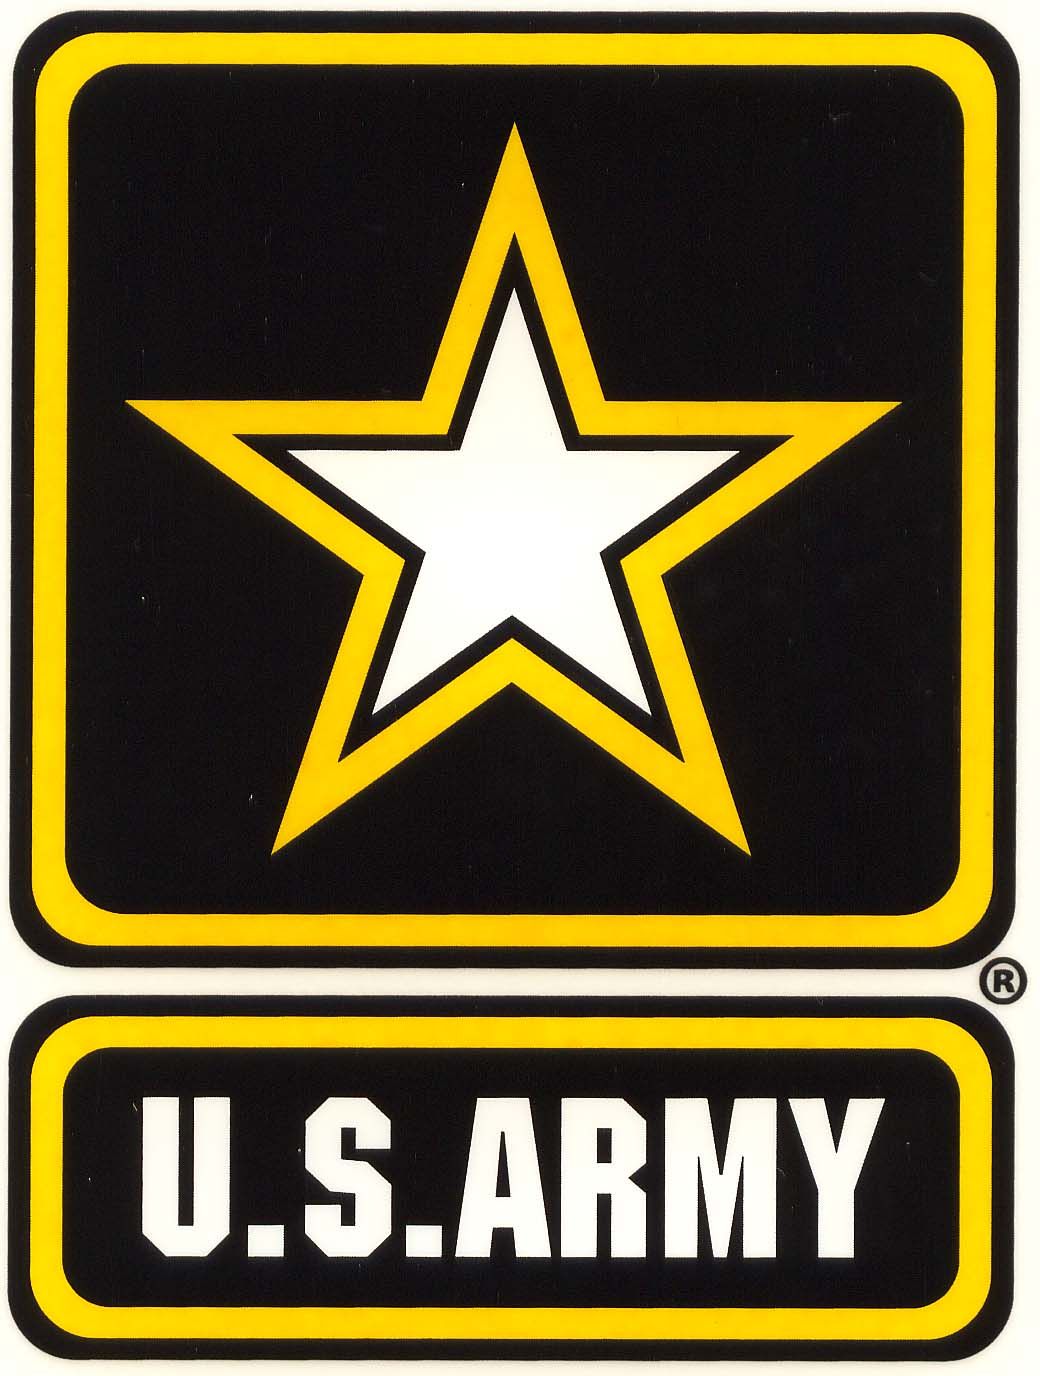 Us Army Logo 10602 Hd Wallpapers in Logos - Imagesci. - ClipArt